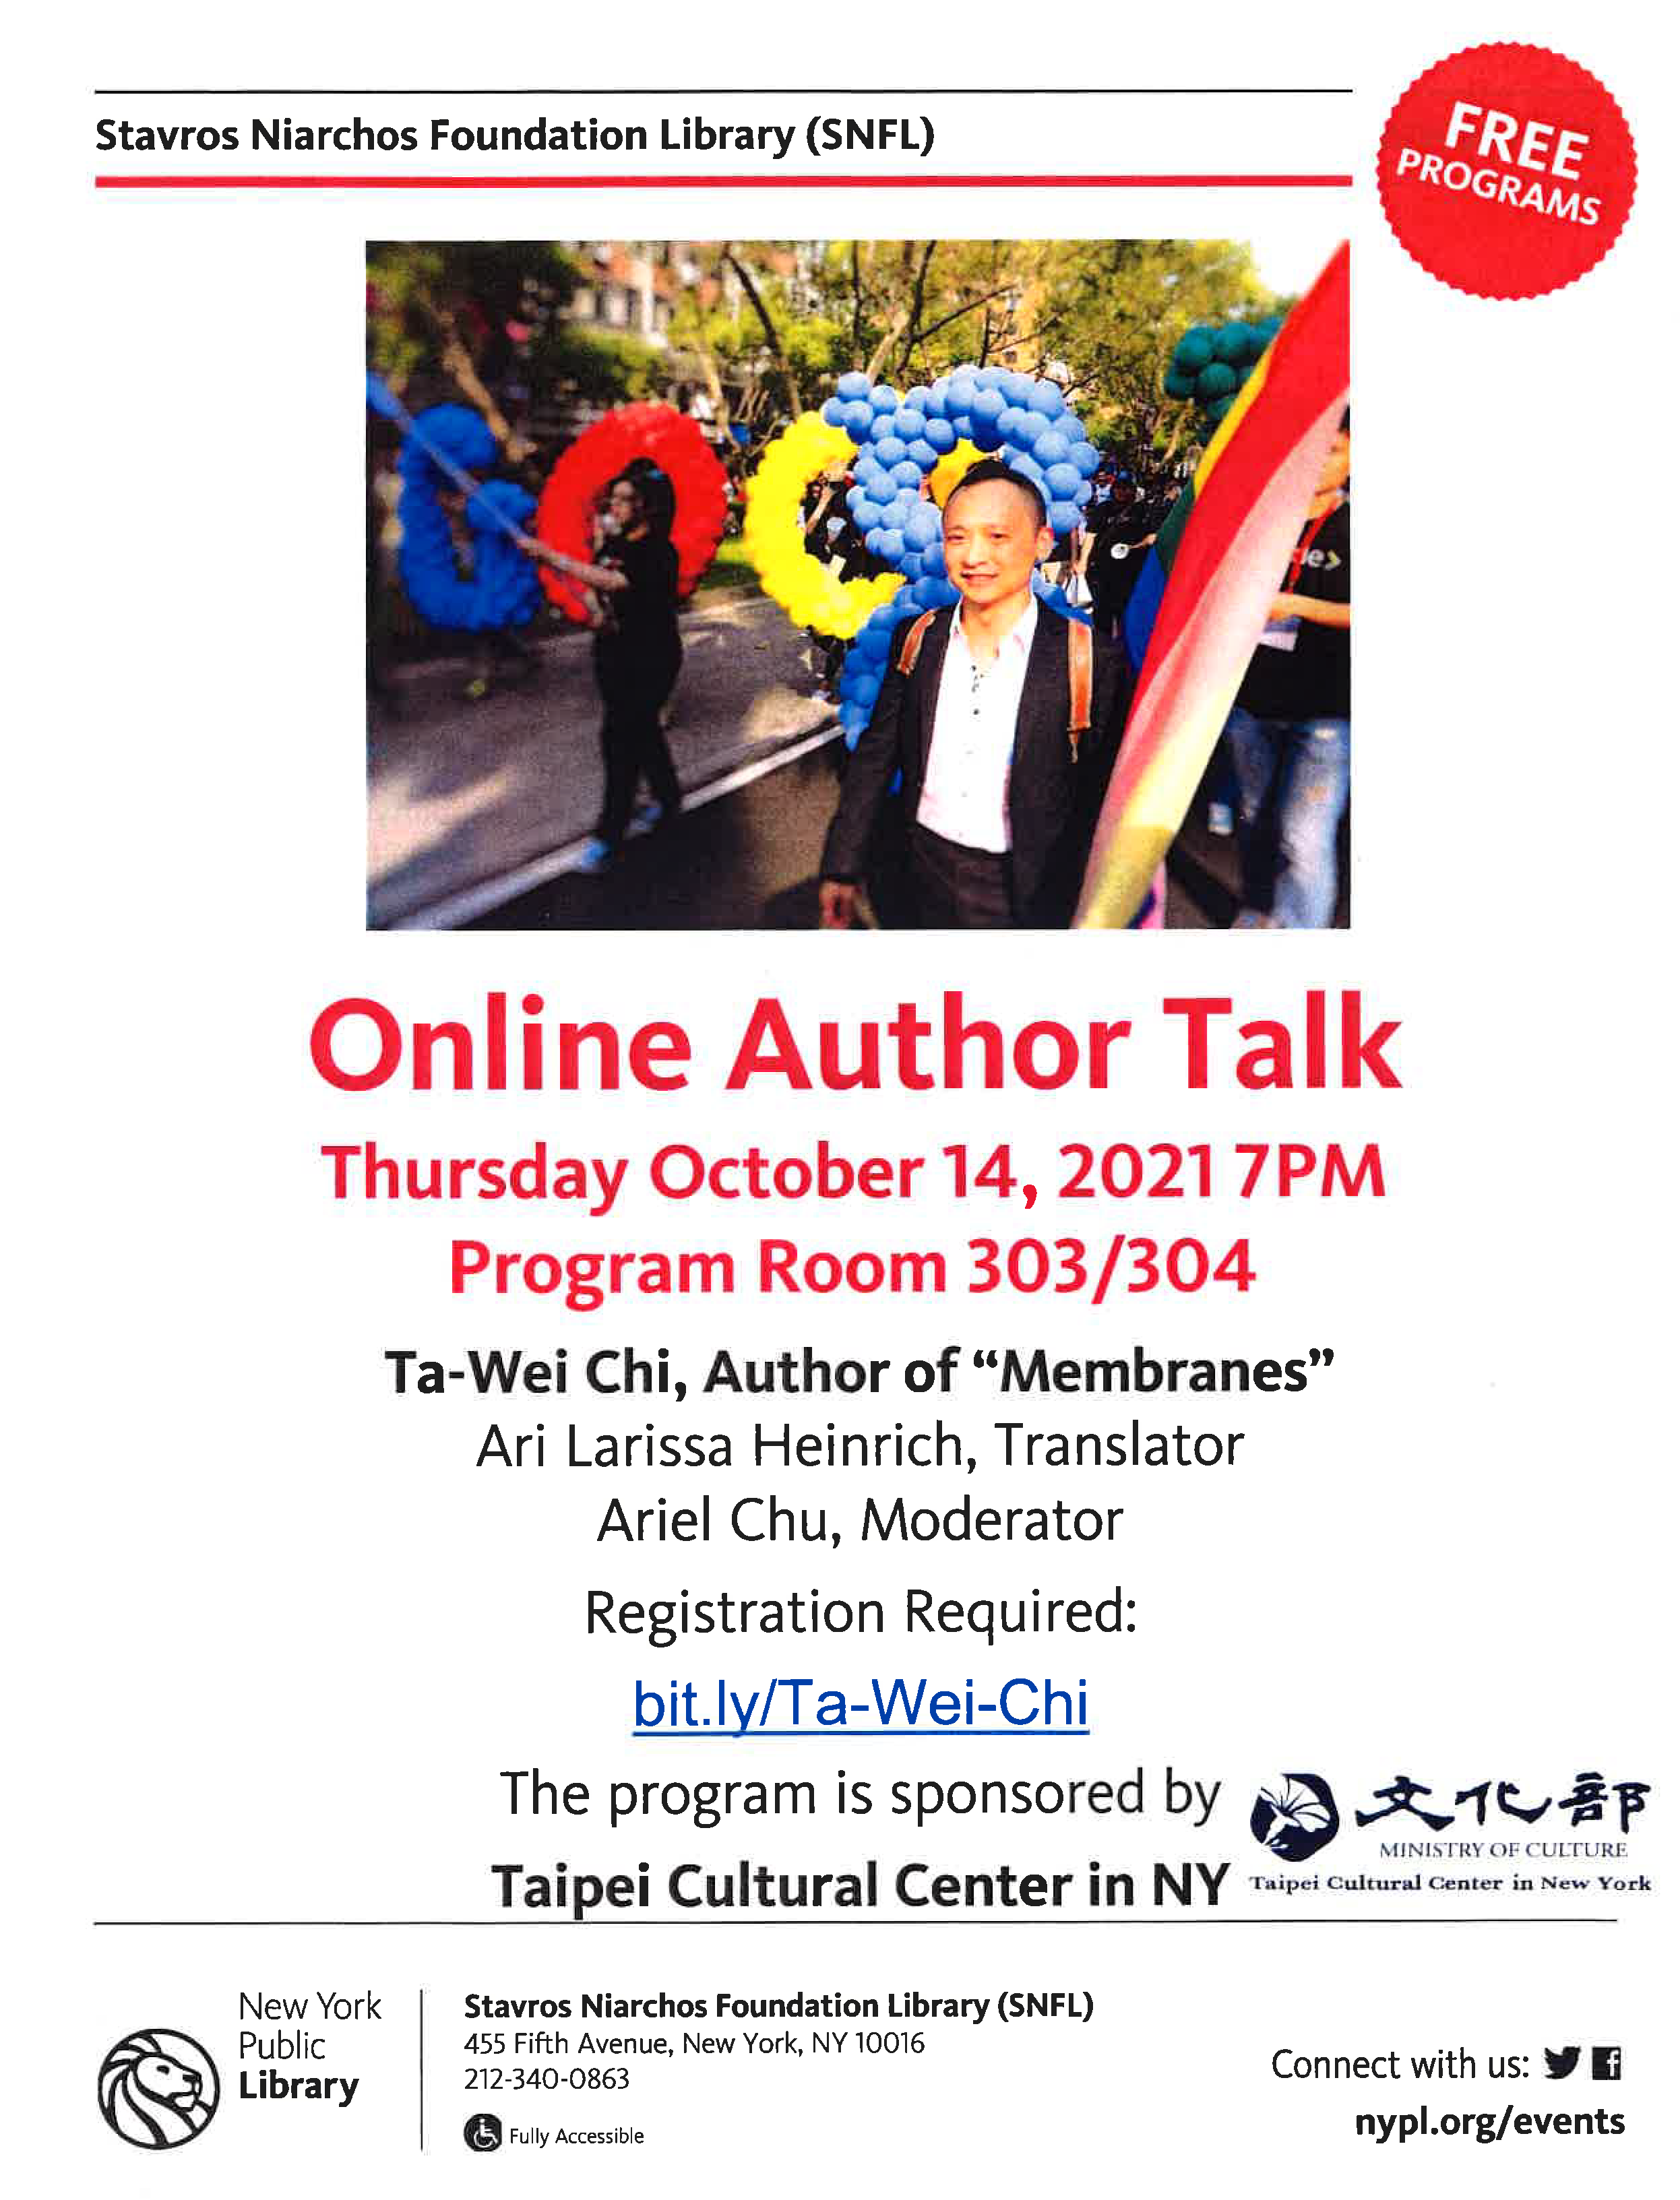 Online Author Talk: Taiwanese Writer CHI TA-WEI and Translator ARI LARISSA HEINRICH-- THE MEMBRANES on October 14